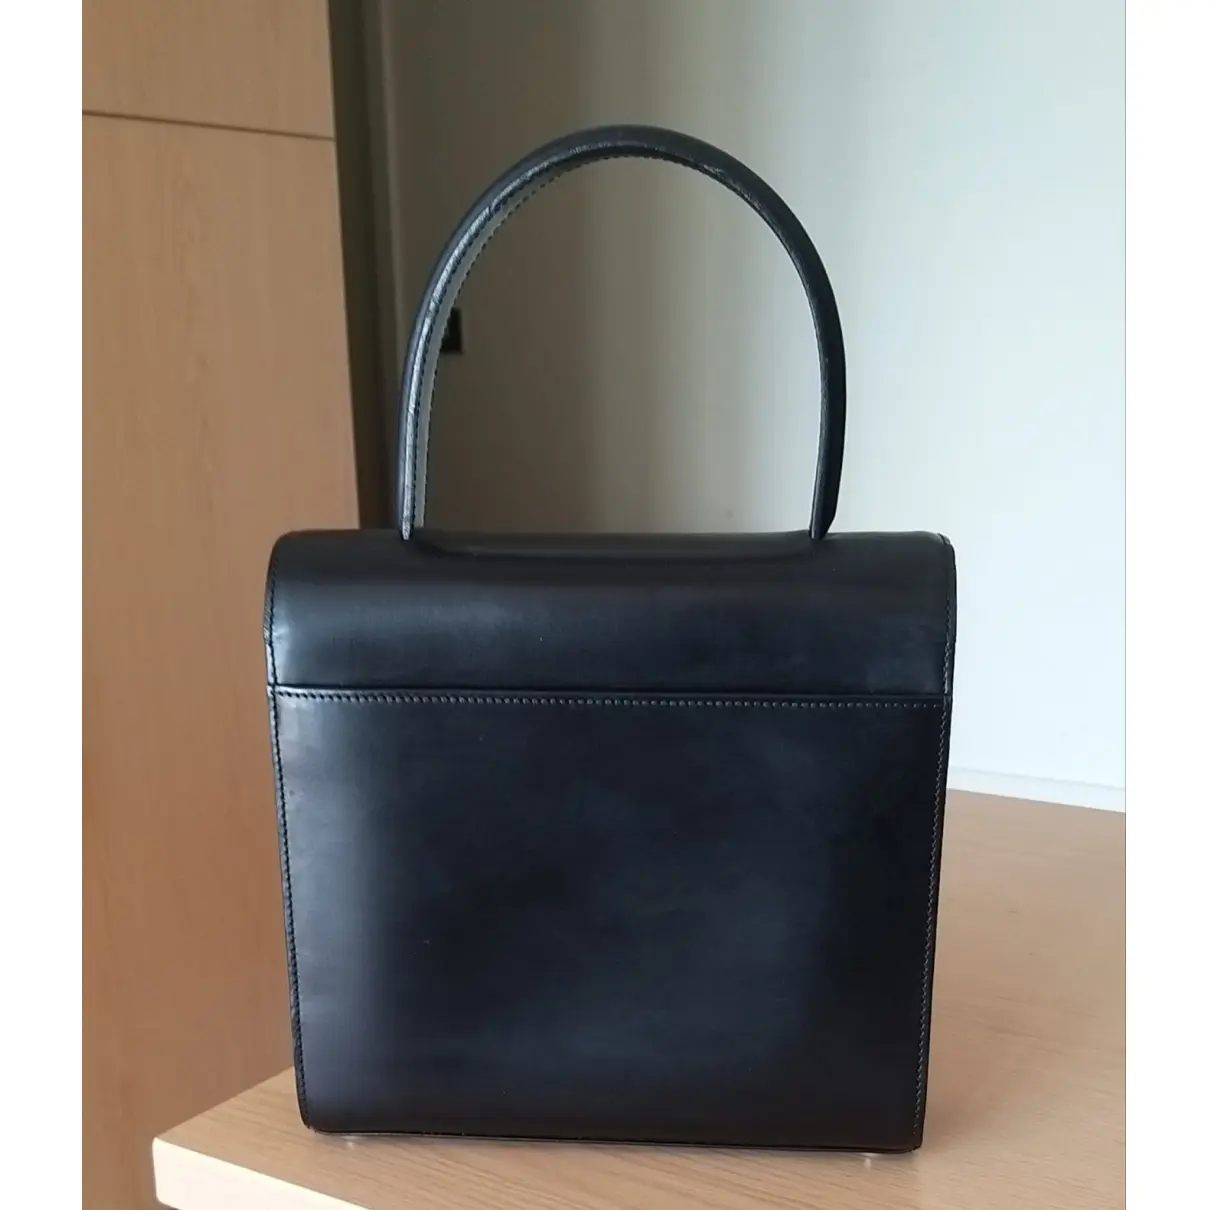 Buy Cartier Leather tote online